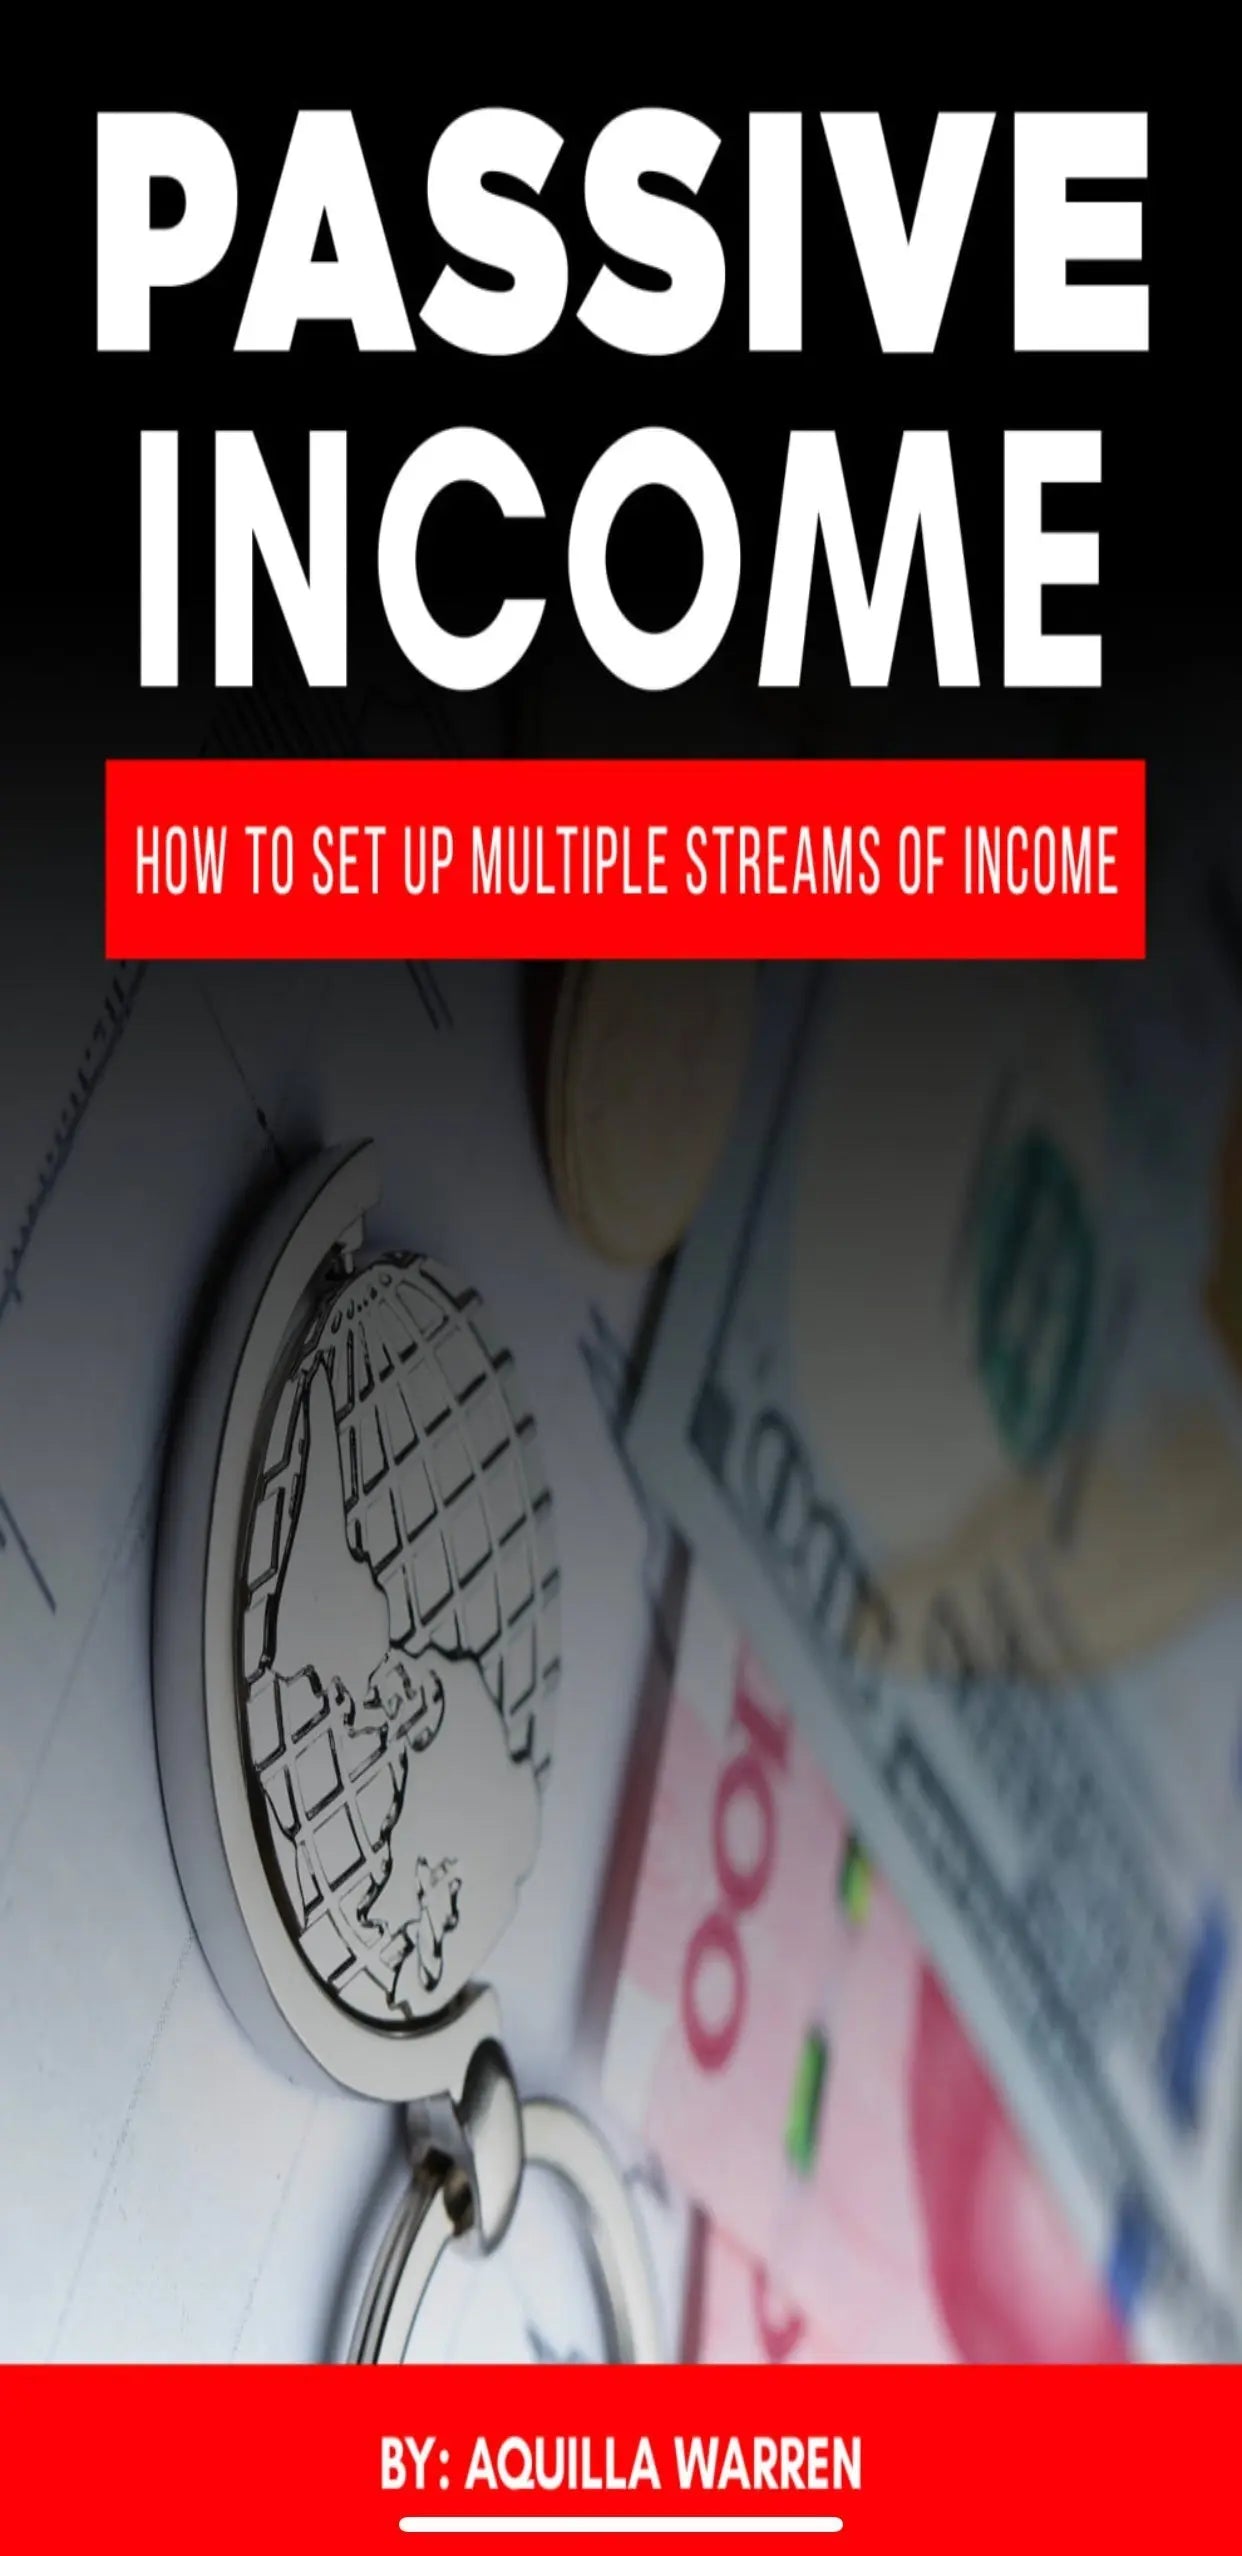 Passive Income How To Set Up Multiple Streams Of Income Book - Adorn Beauty Boutique